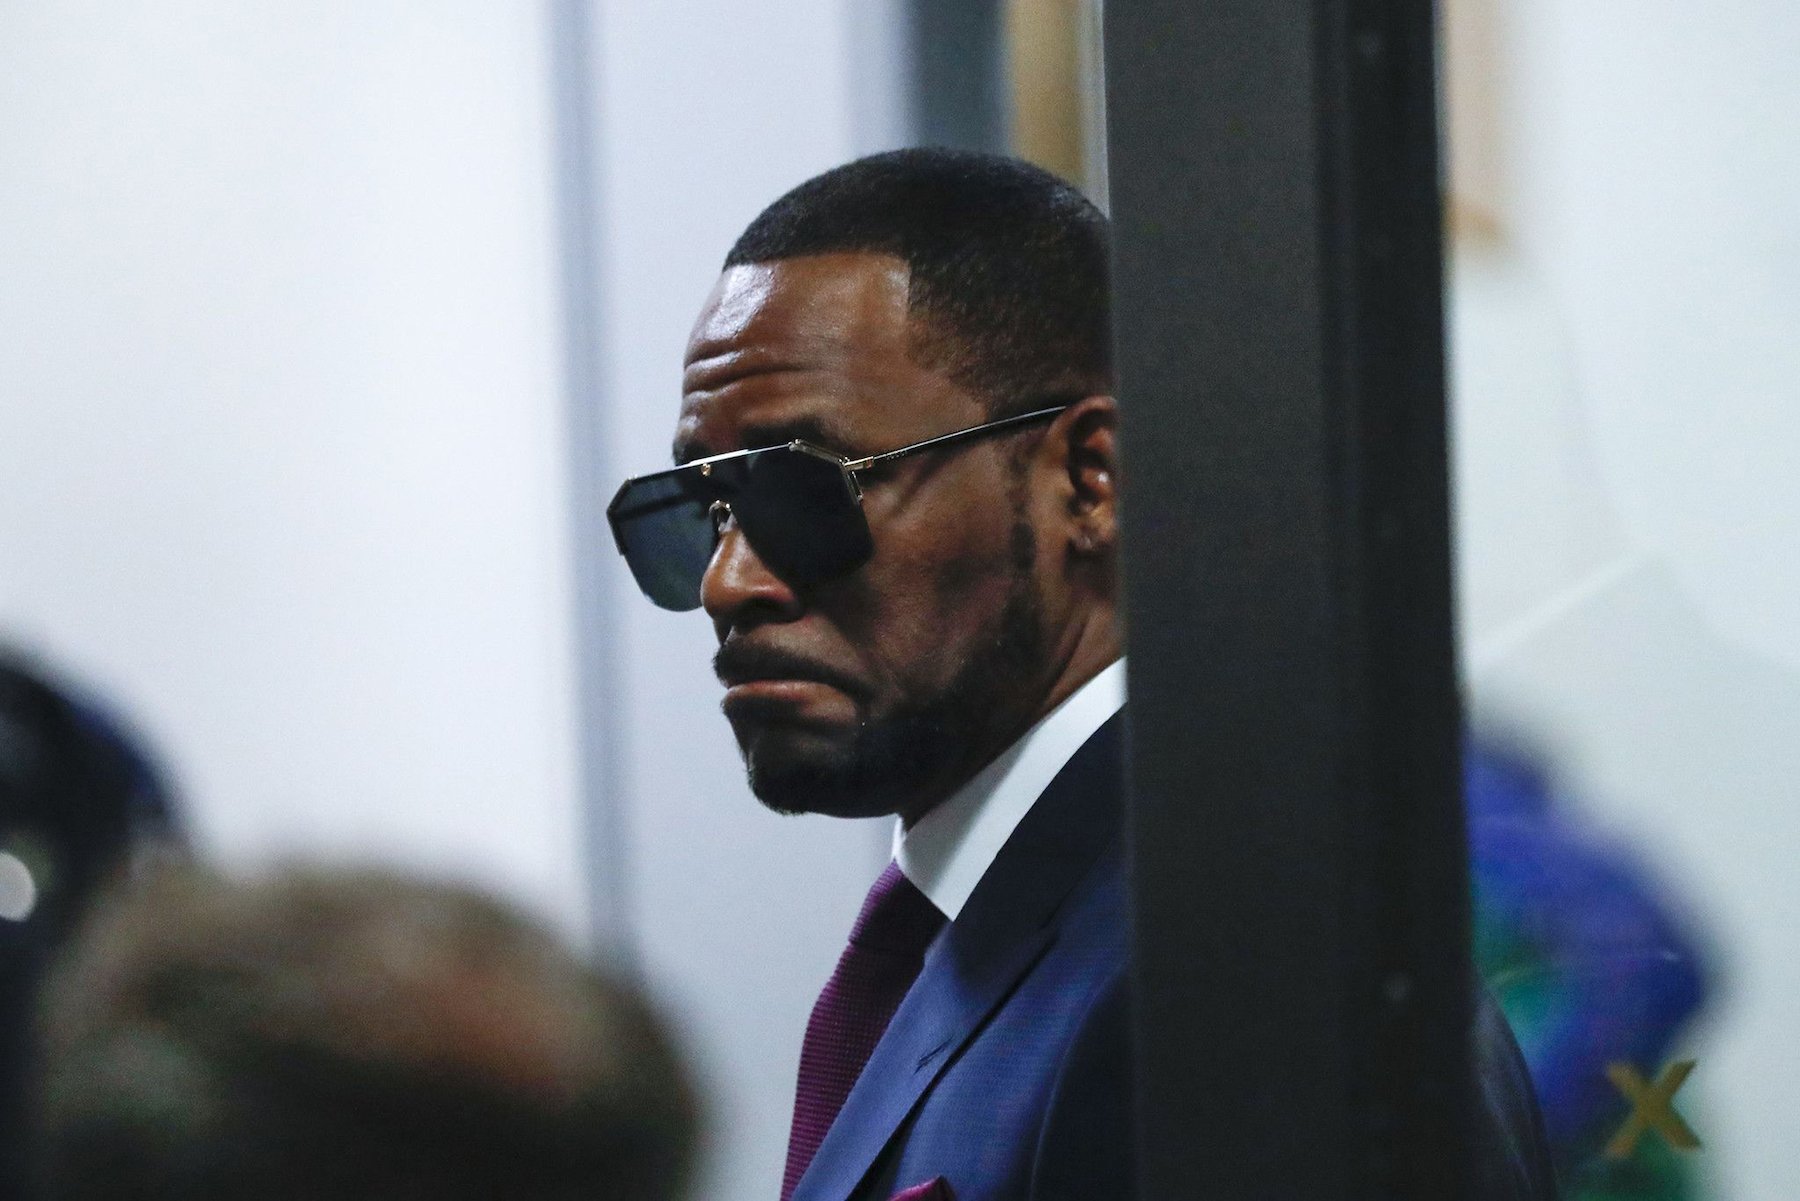 R. Kelly, who has faced abuse charges in recent years, wearing sunglasses and a navy suit